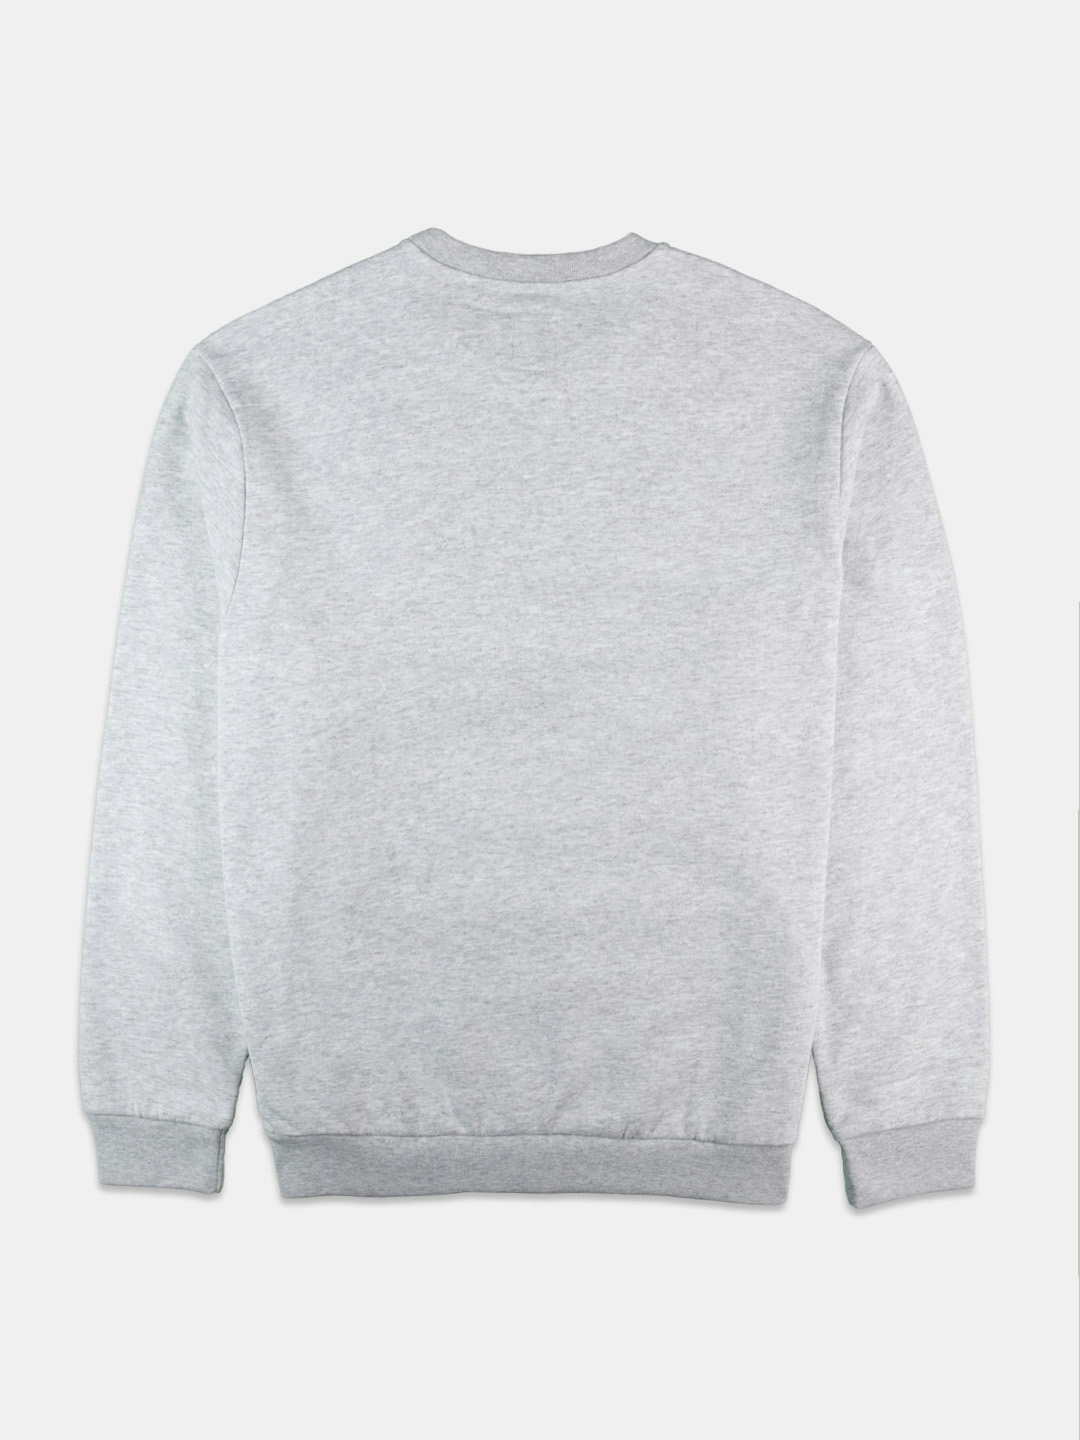 Vans Relaxed Fit Crew Sweater Light Grey Heather 2